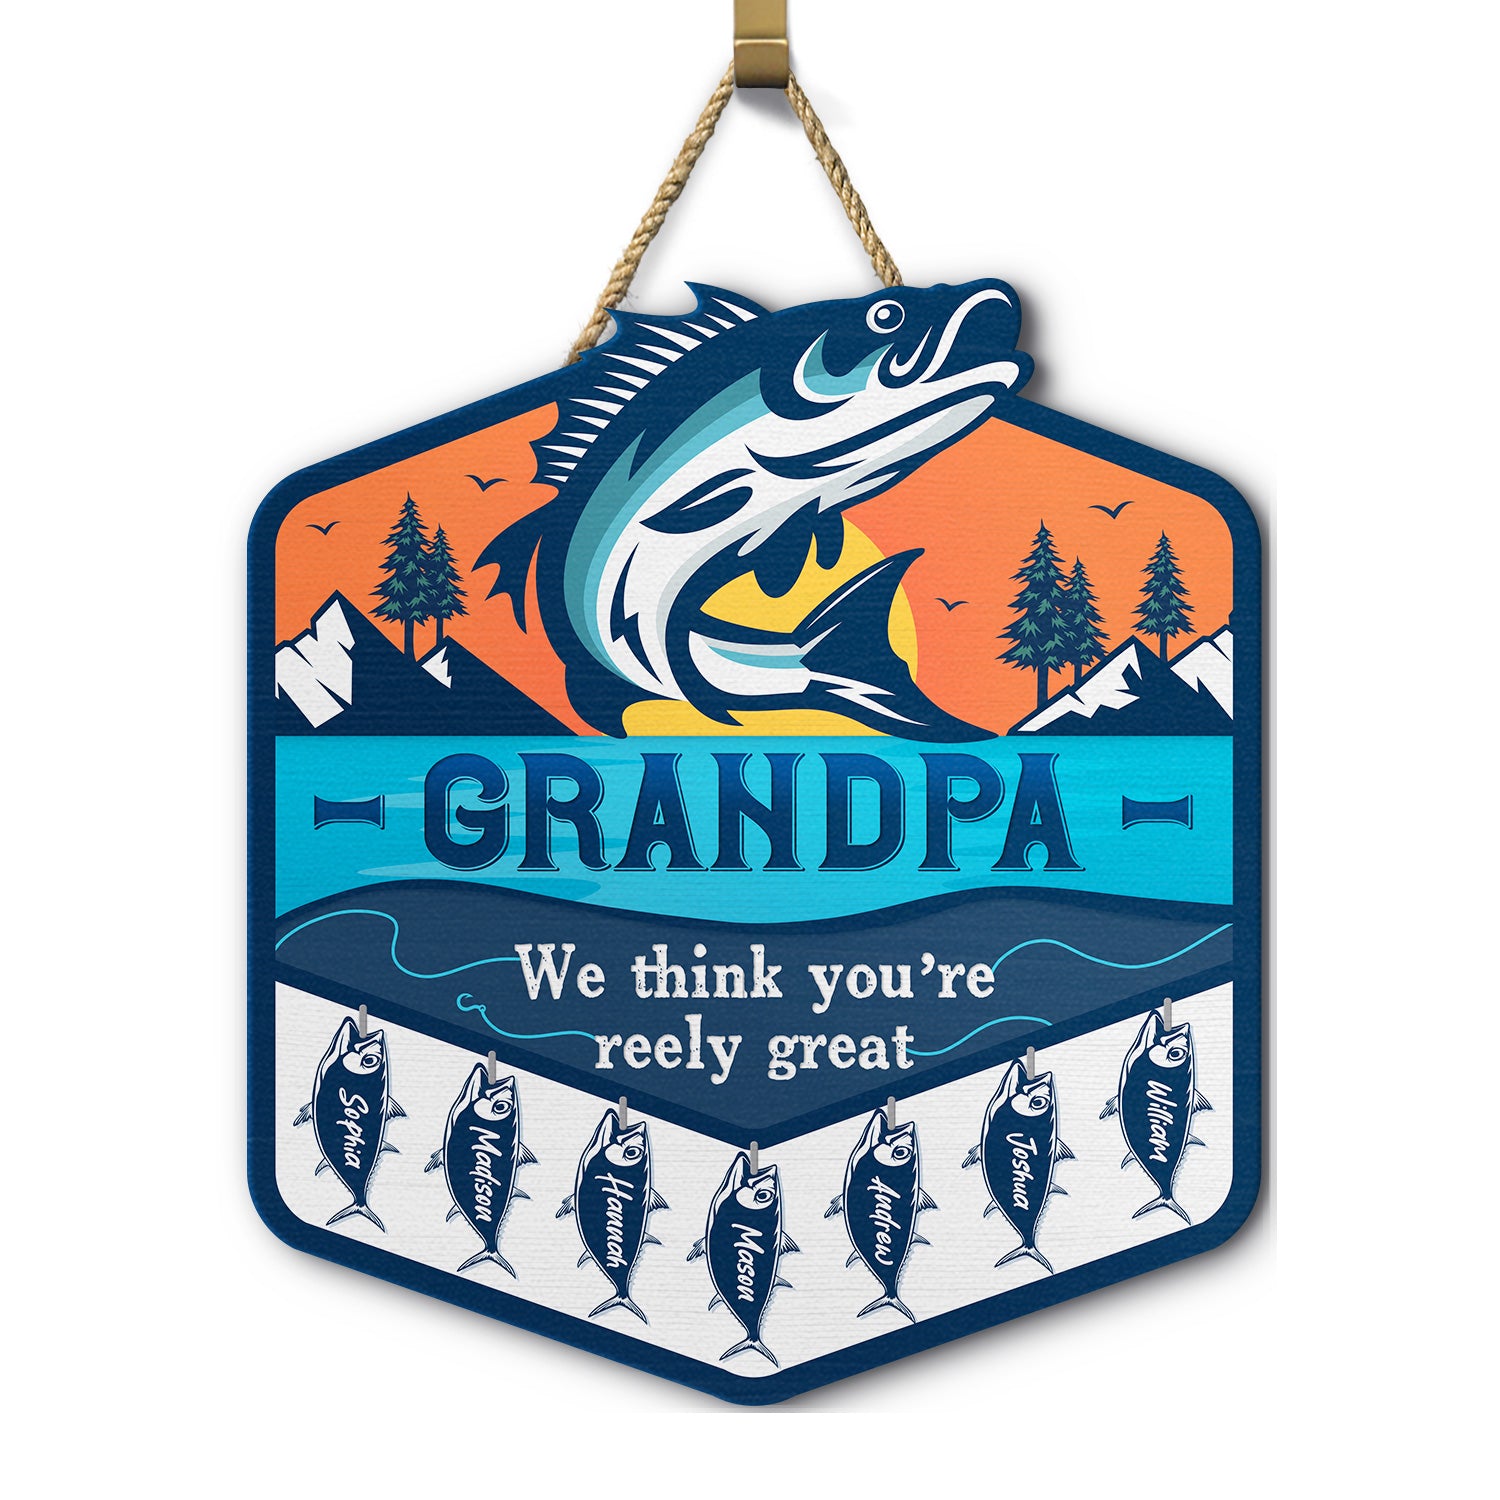 Grandpa We Think You're Reely Great - Personalized Custom Shaped Wood Sign